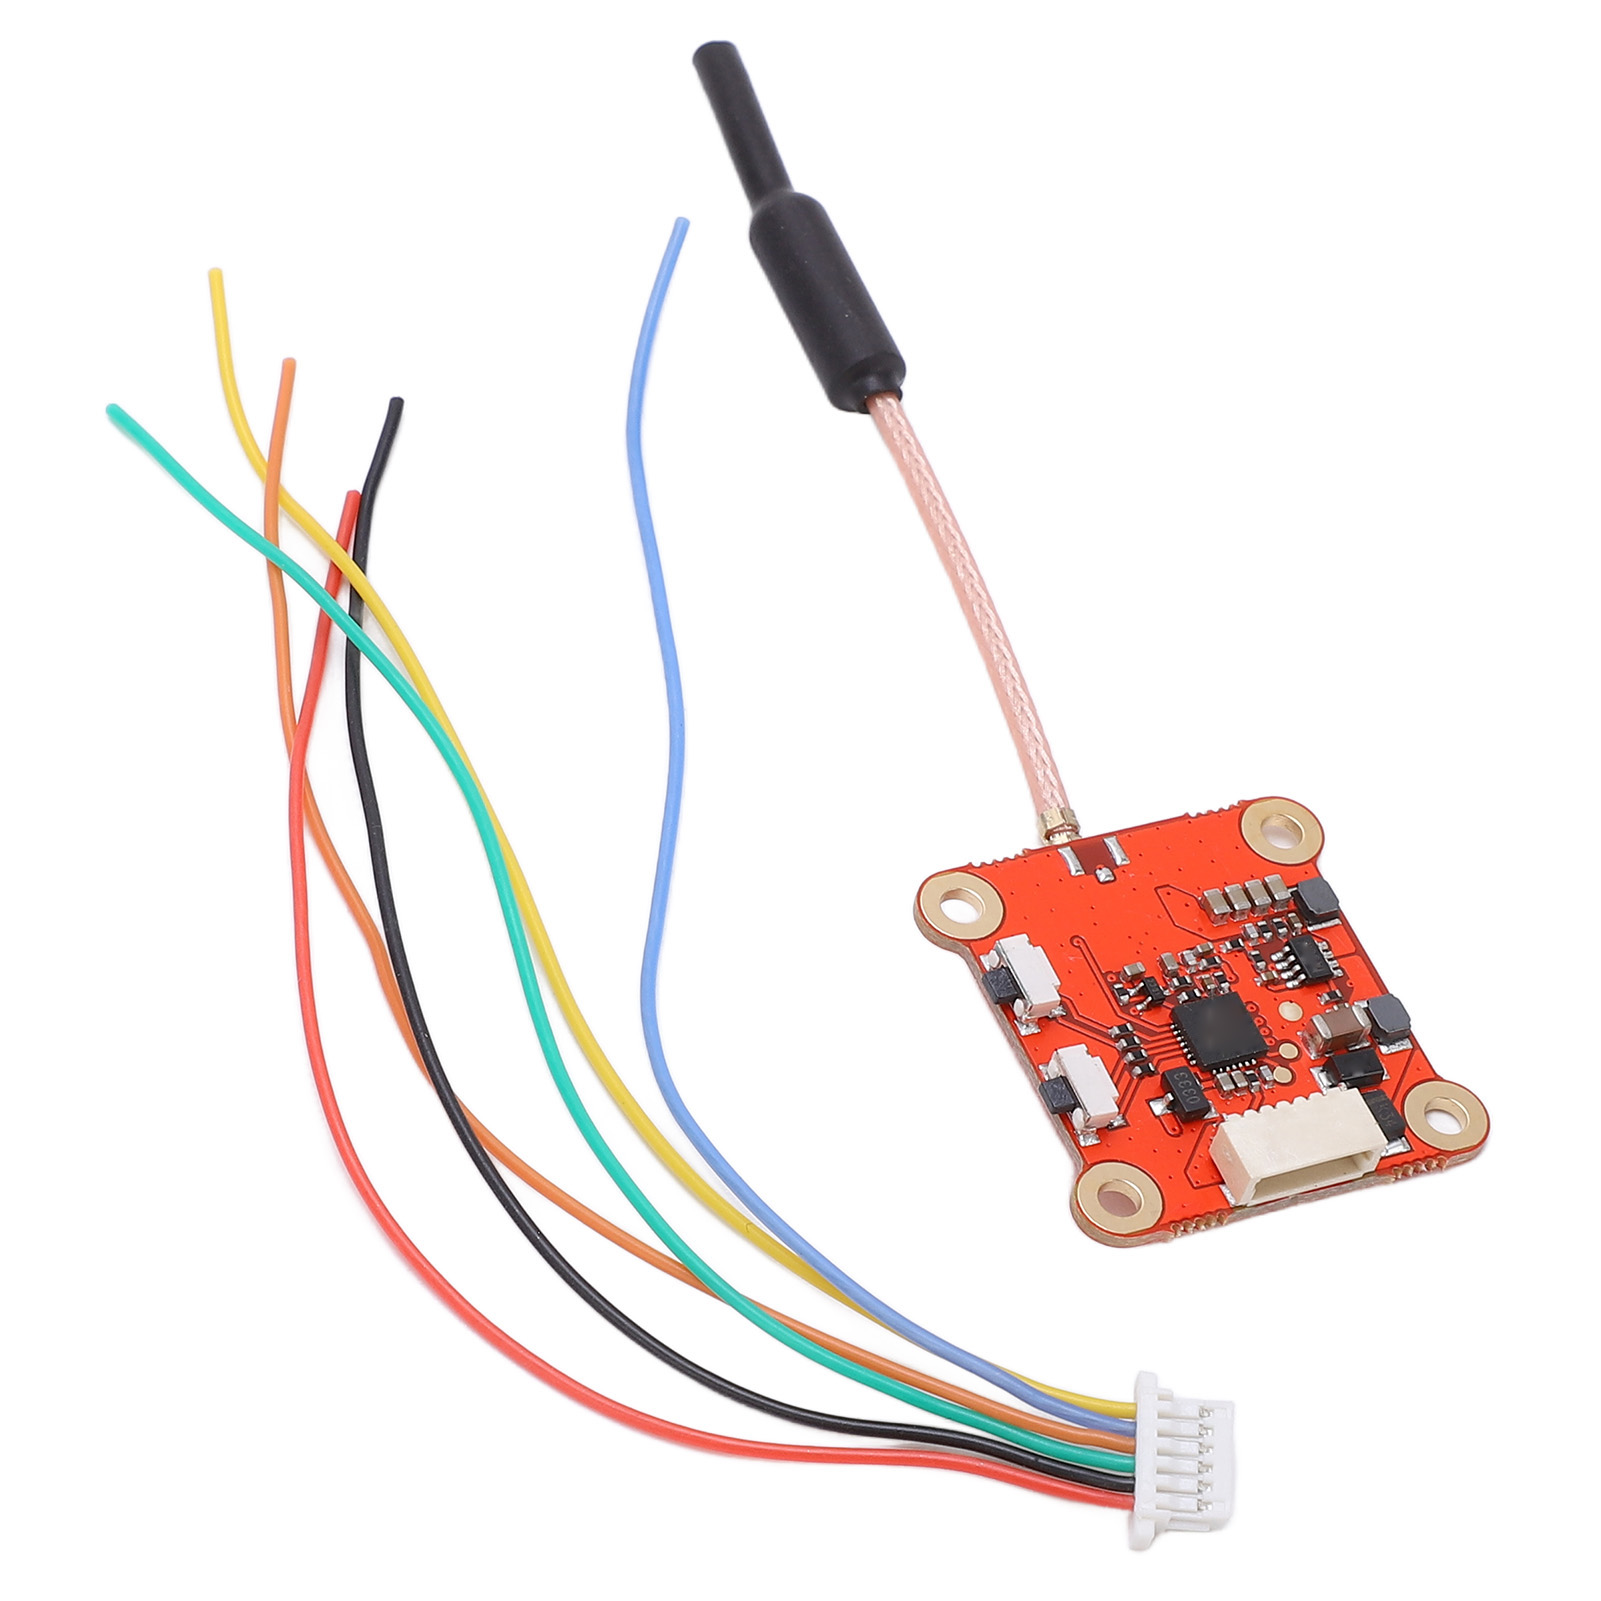 Adjustable Power FPV Transmitter for Racing Drones